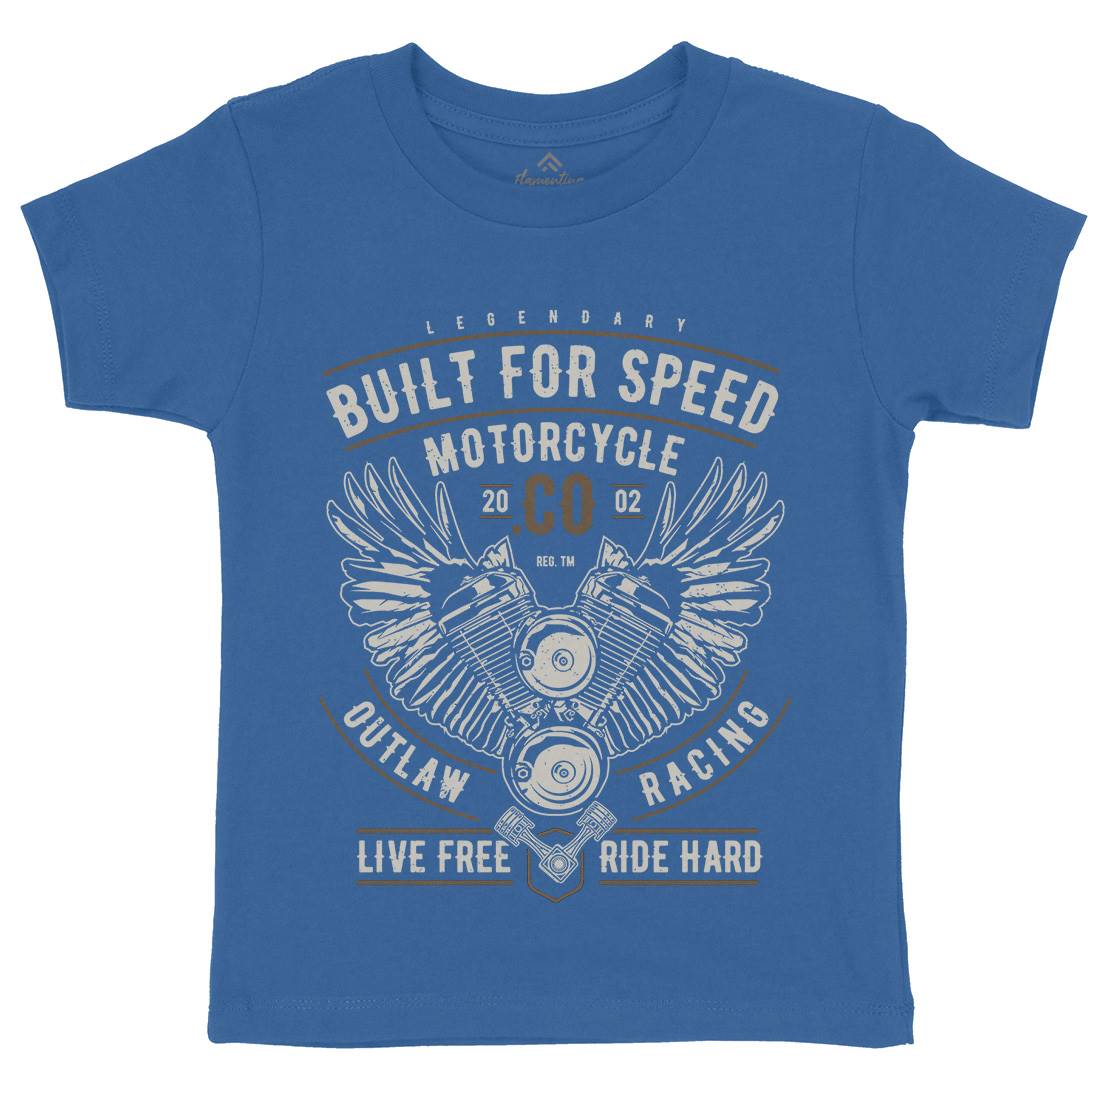 Built For Speed Kids Crew Neck T-Shirt Motorcycles A628